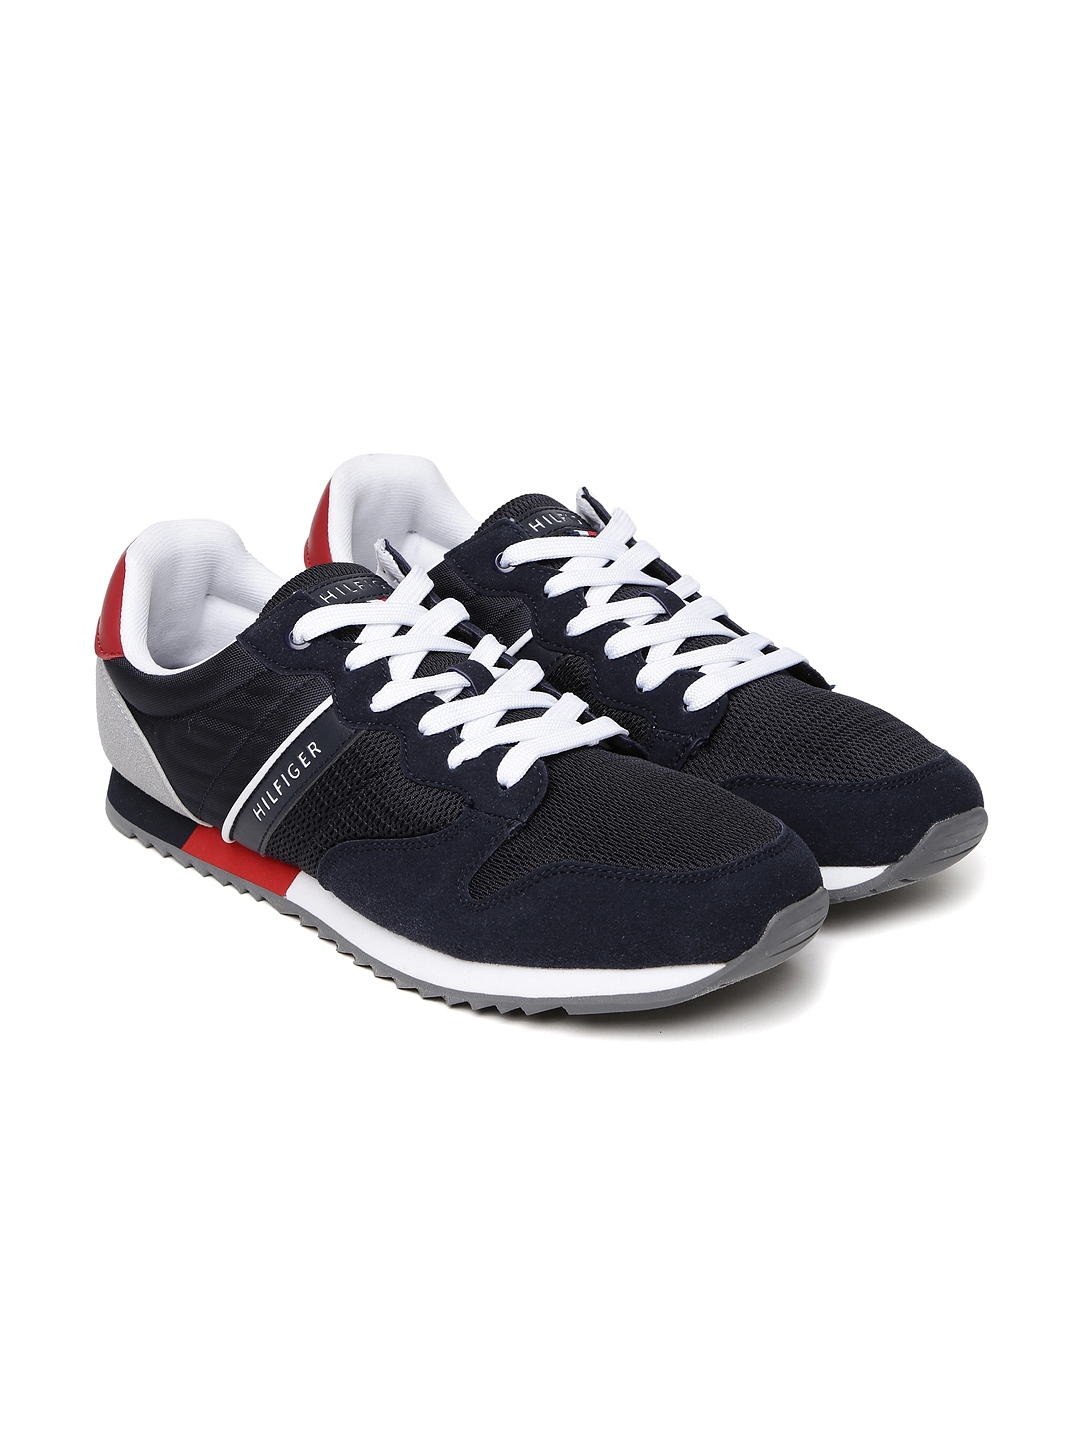 Buy Tommy Hilfiger Men Navy Blue Colourblocked Sneakers - Casual Shoes ...